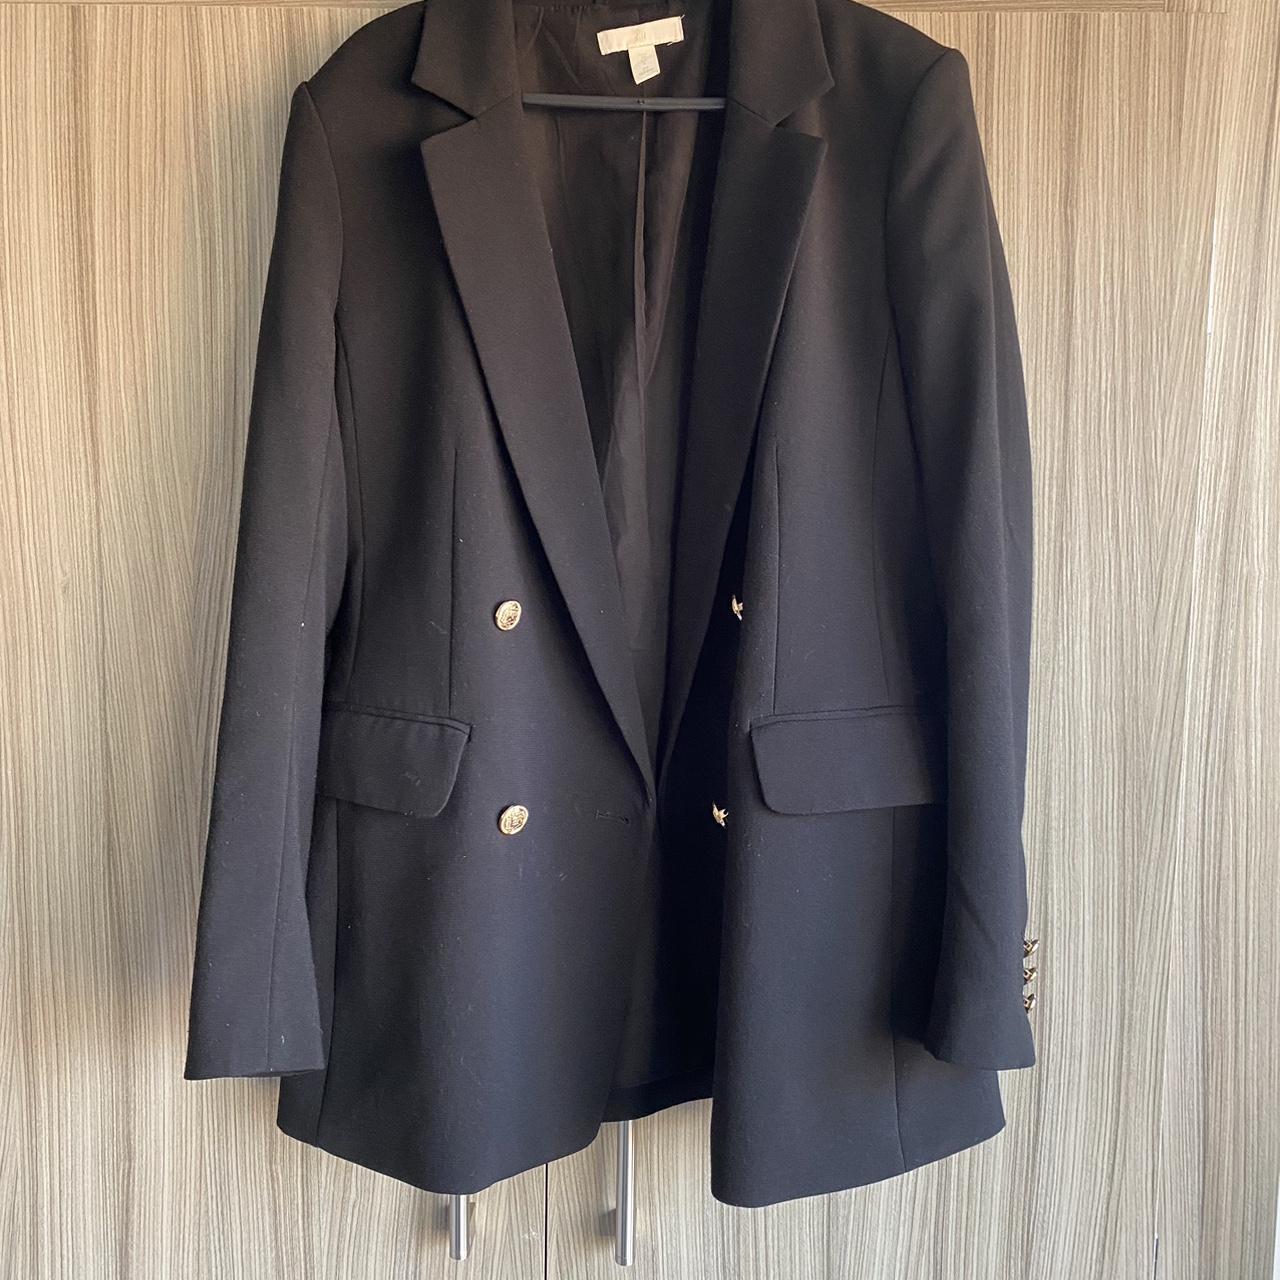 H&M black classy blazer size 8 with gold buttons.... - Depop